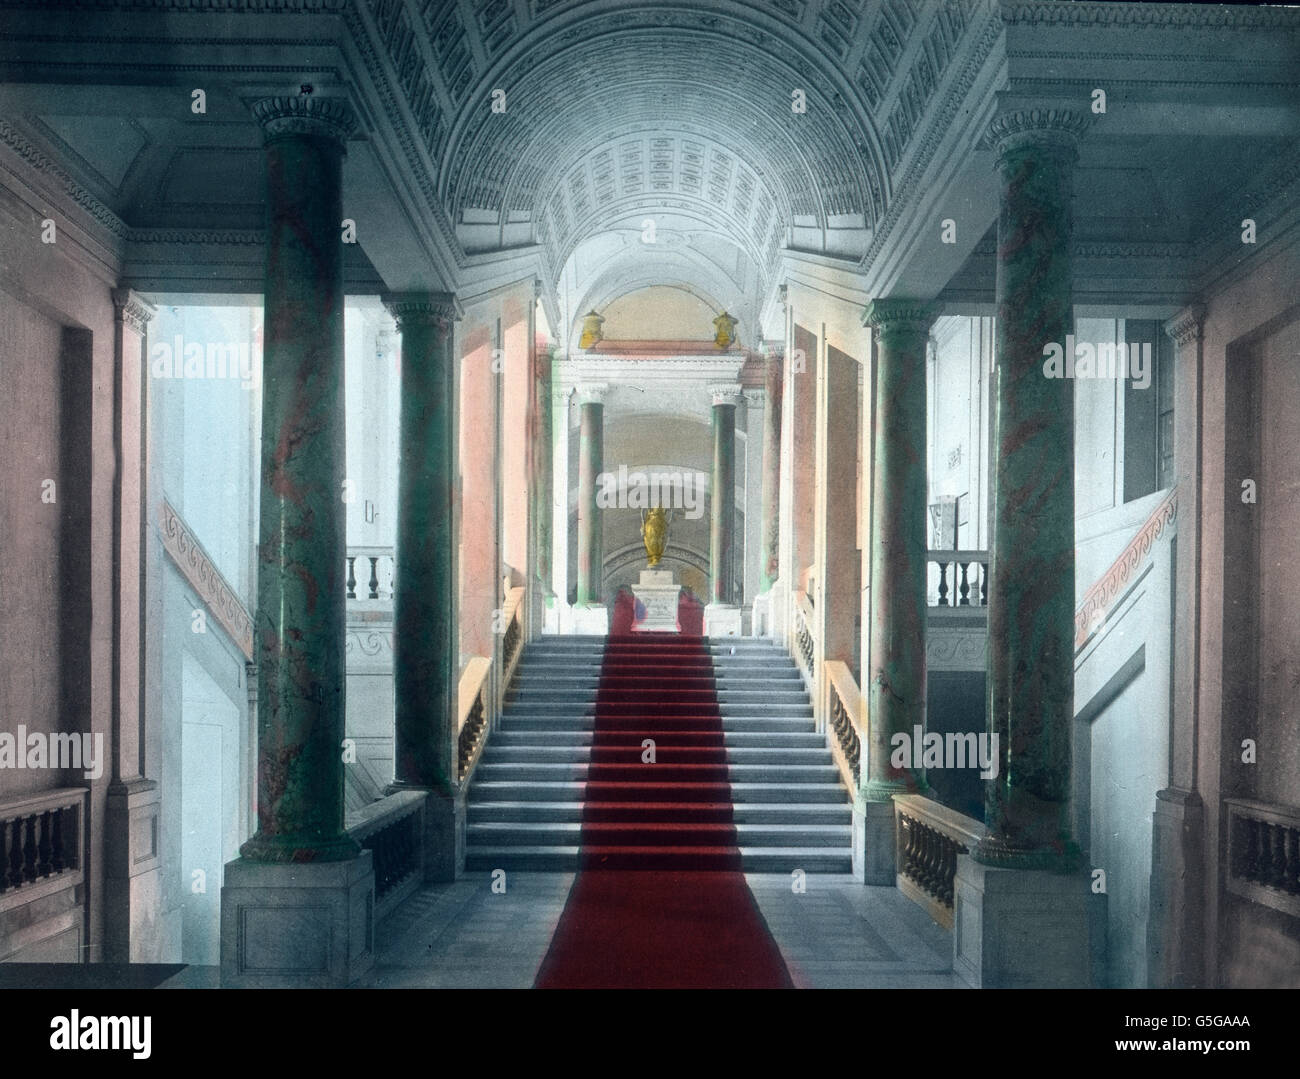 Treppenhaus im Vatikan. Staircase in the Vatican. red carpet, stairs, steps, architecture, interior, inside, Europe, Italy, Rome, history, historical, 1910s, 1920s, 20th century, archive, Carl Simon, hand-coloured glass slide Stock Photo